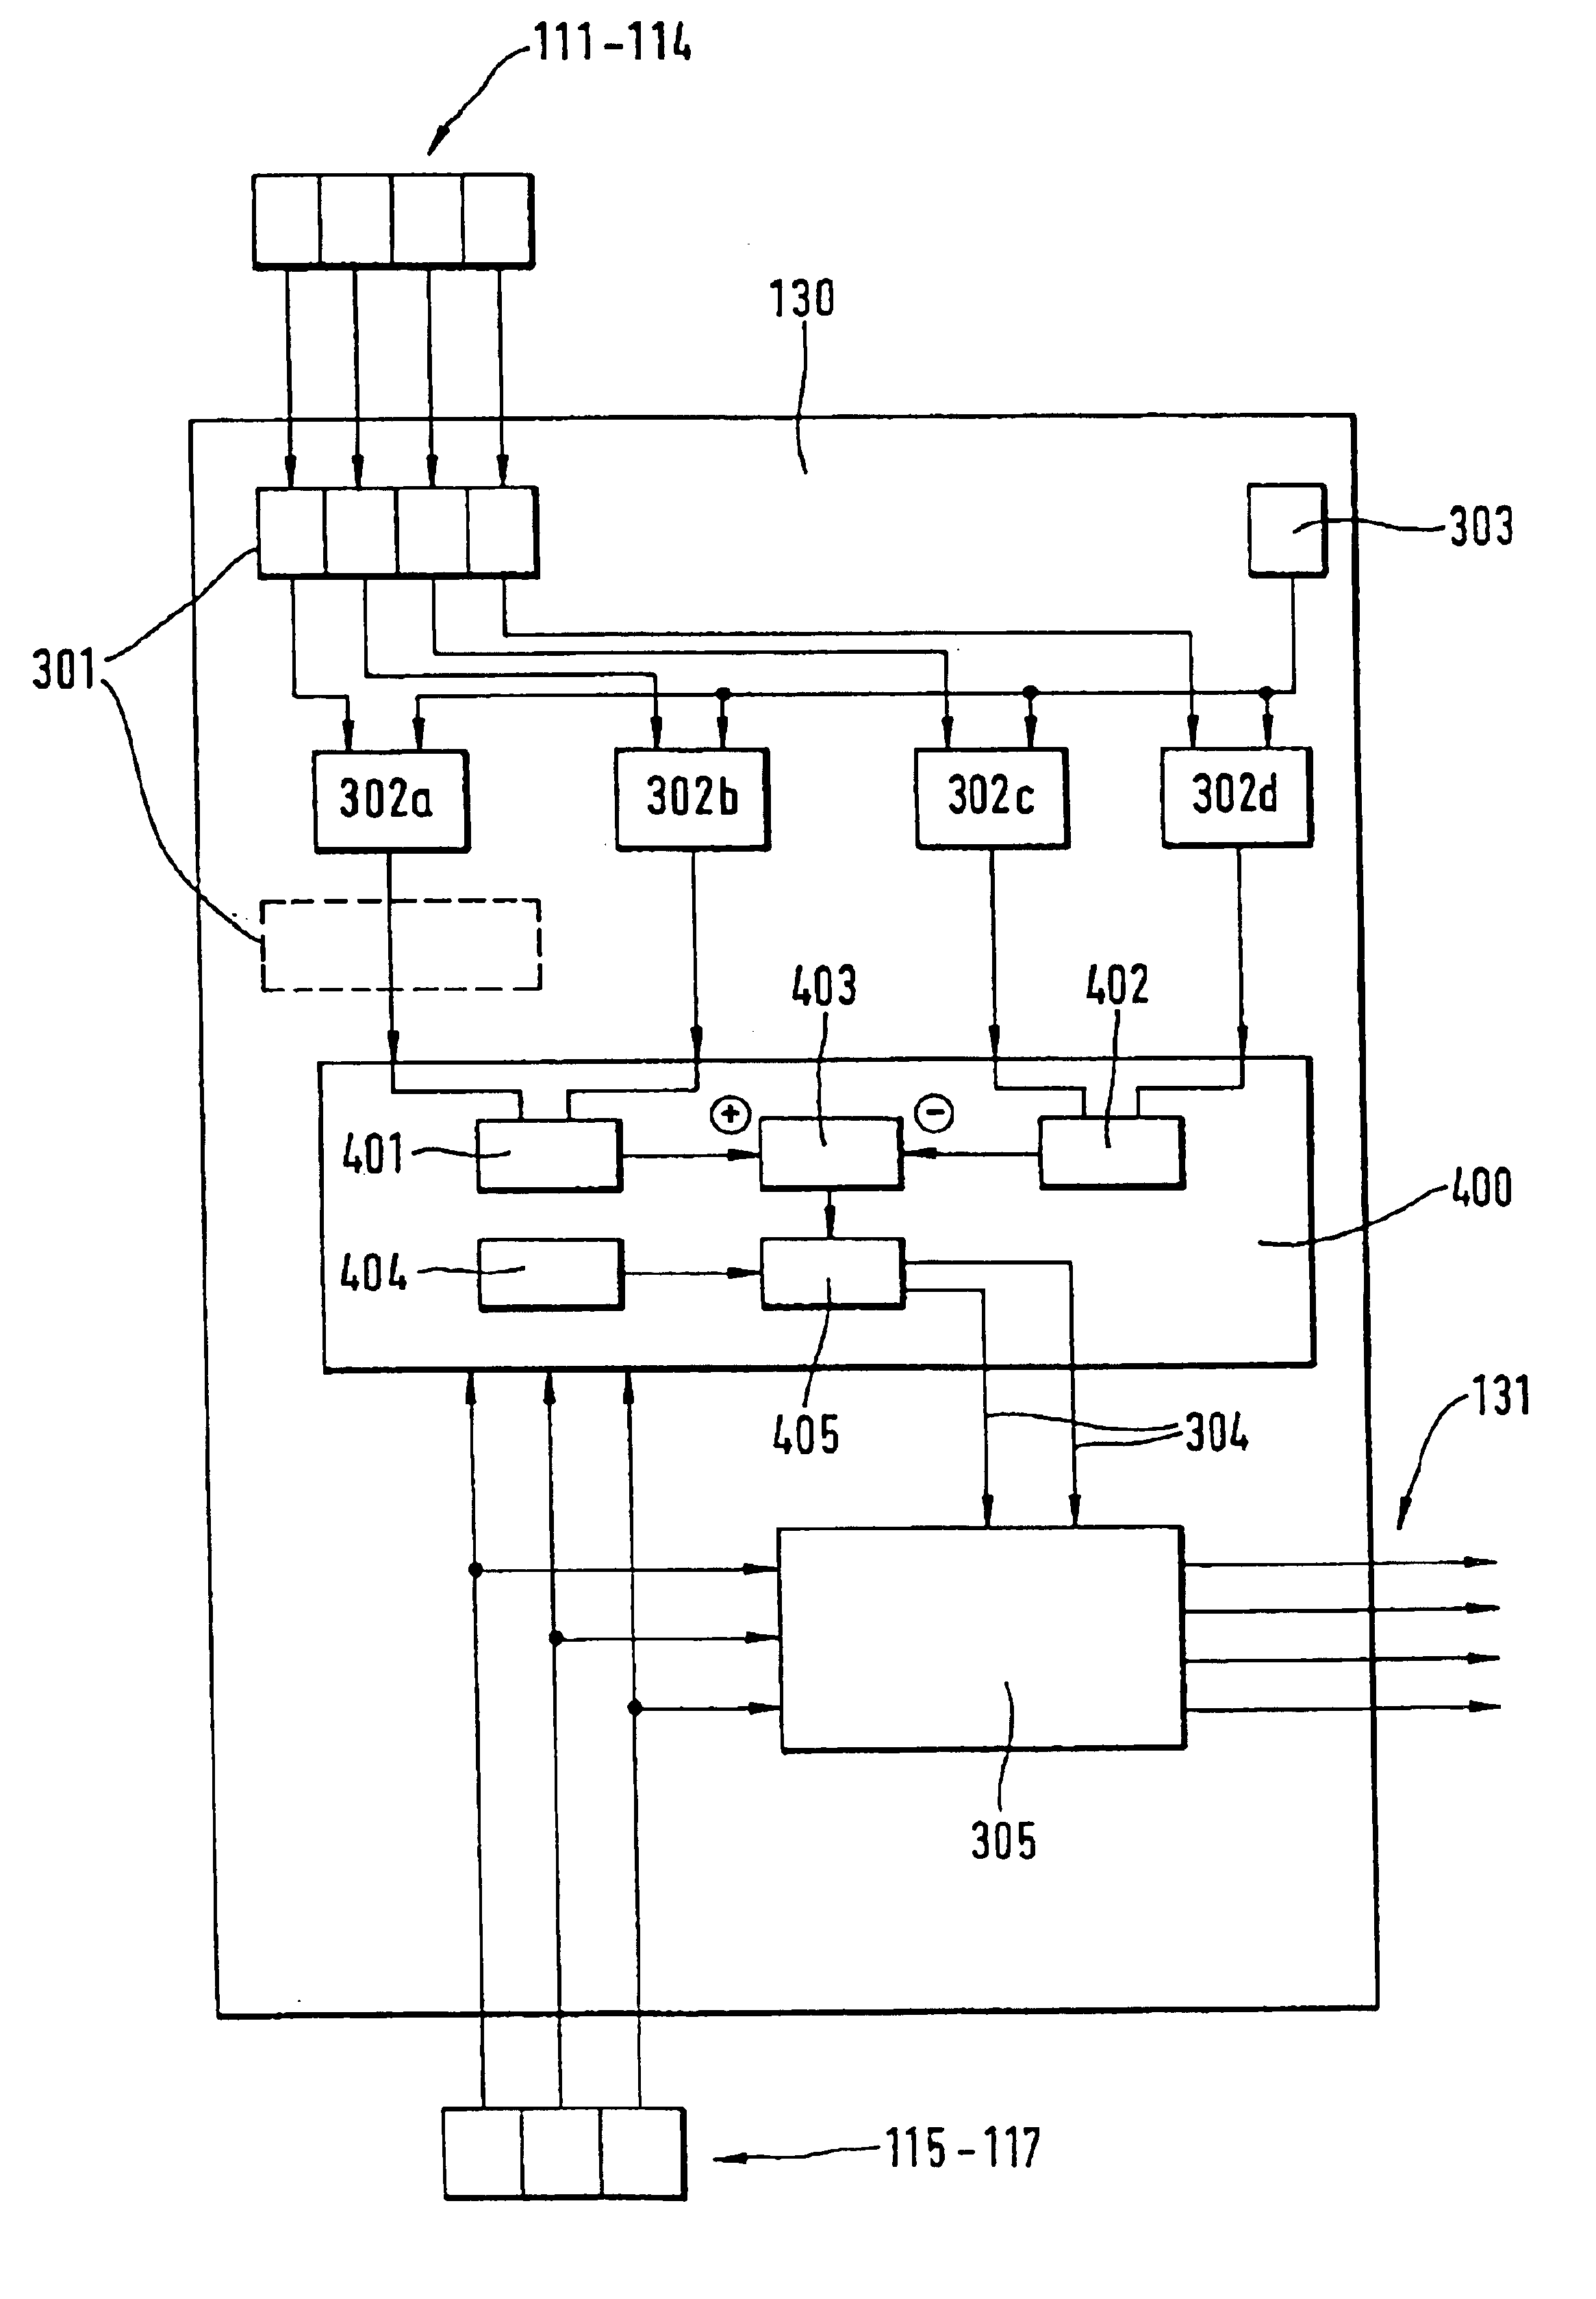 Method and device for recognizing cornering and for stabilizing a vehicle in case of over-steered cornering